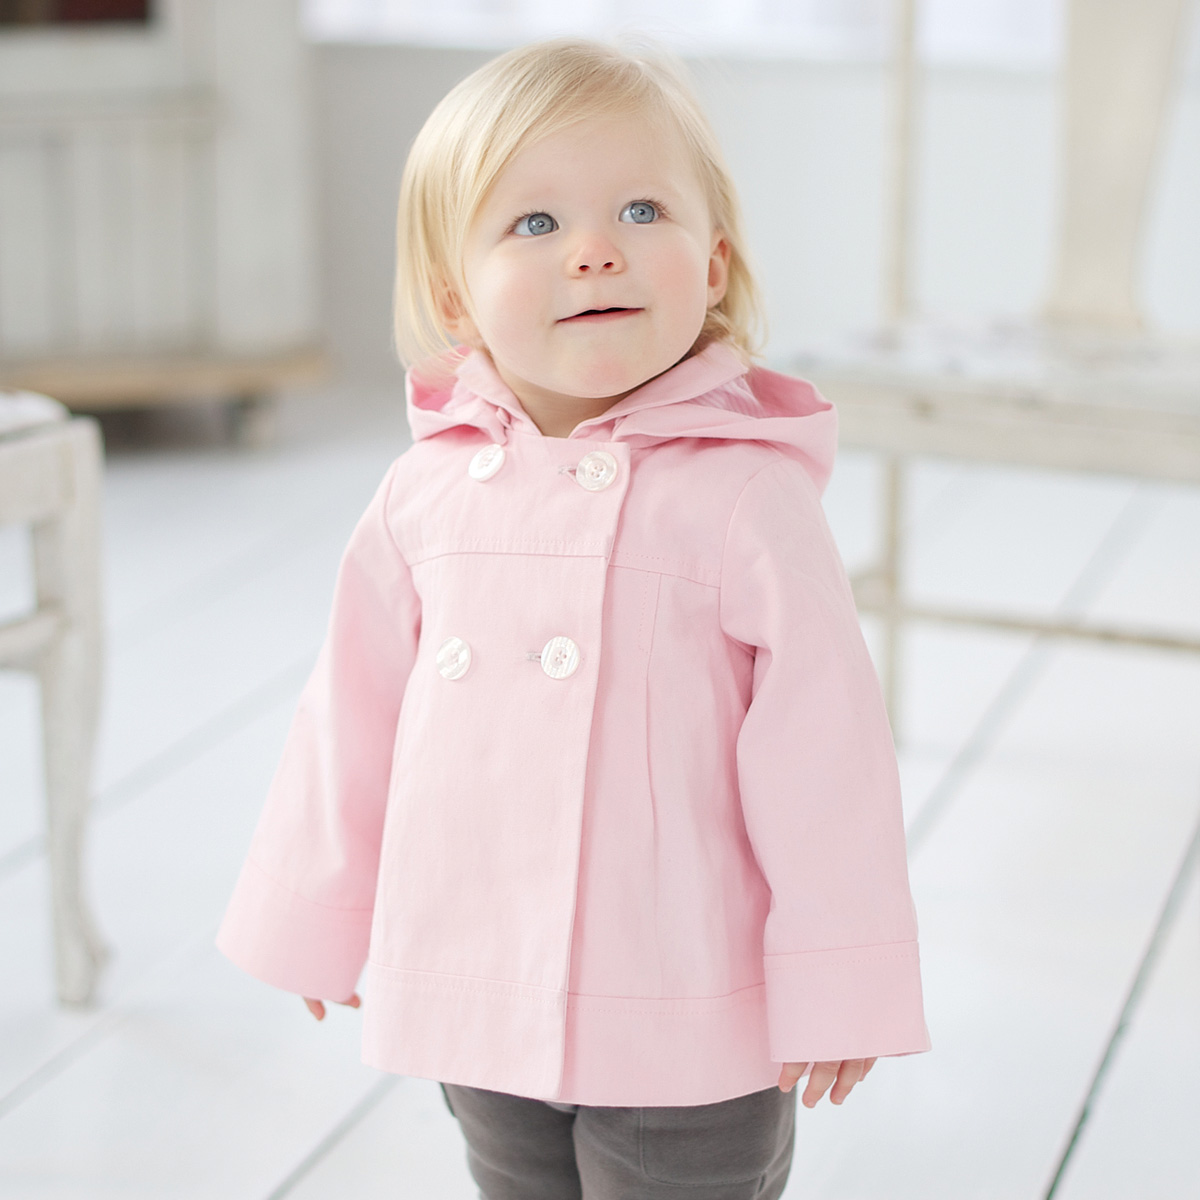 Davebella spring new arrival princess baby 100% cotton with a hood small trench baby dresses db191